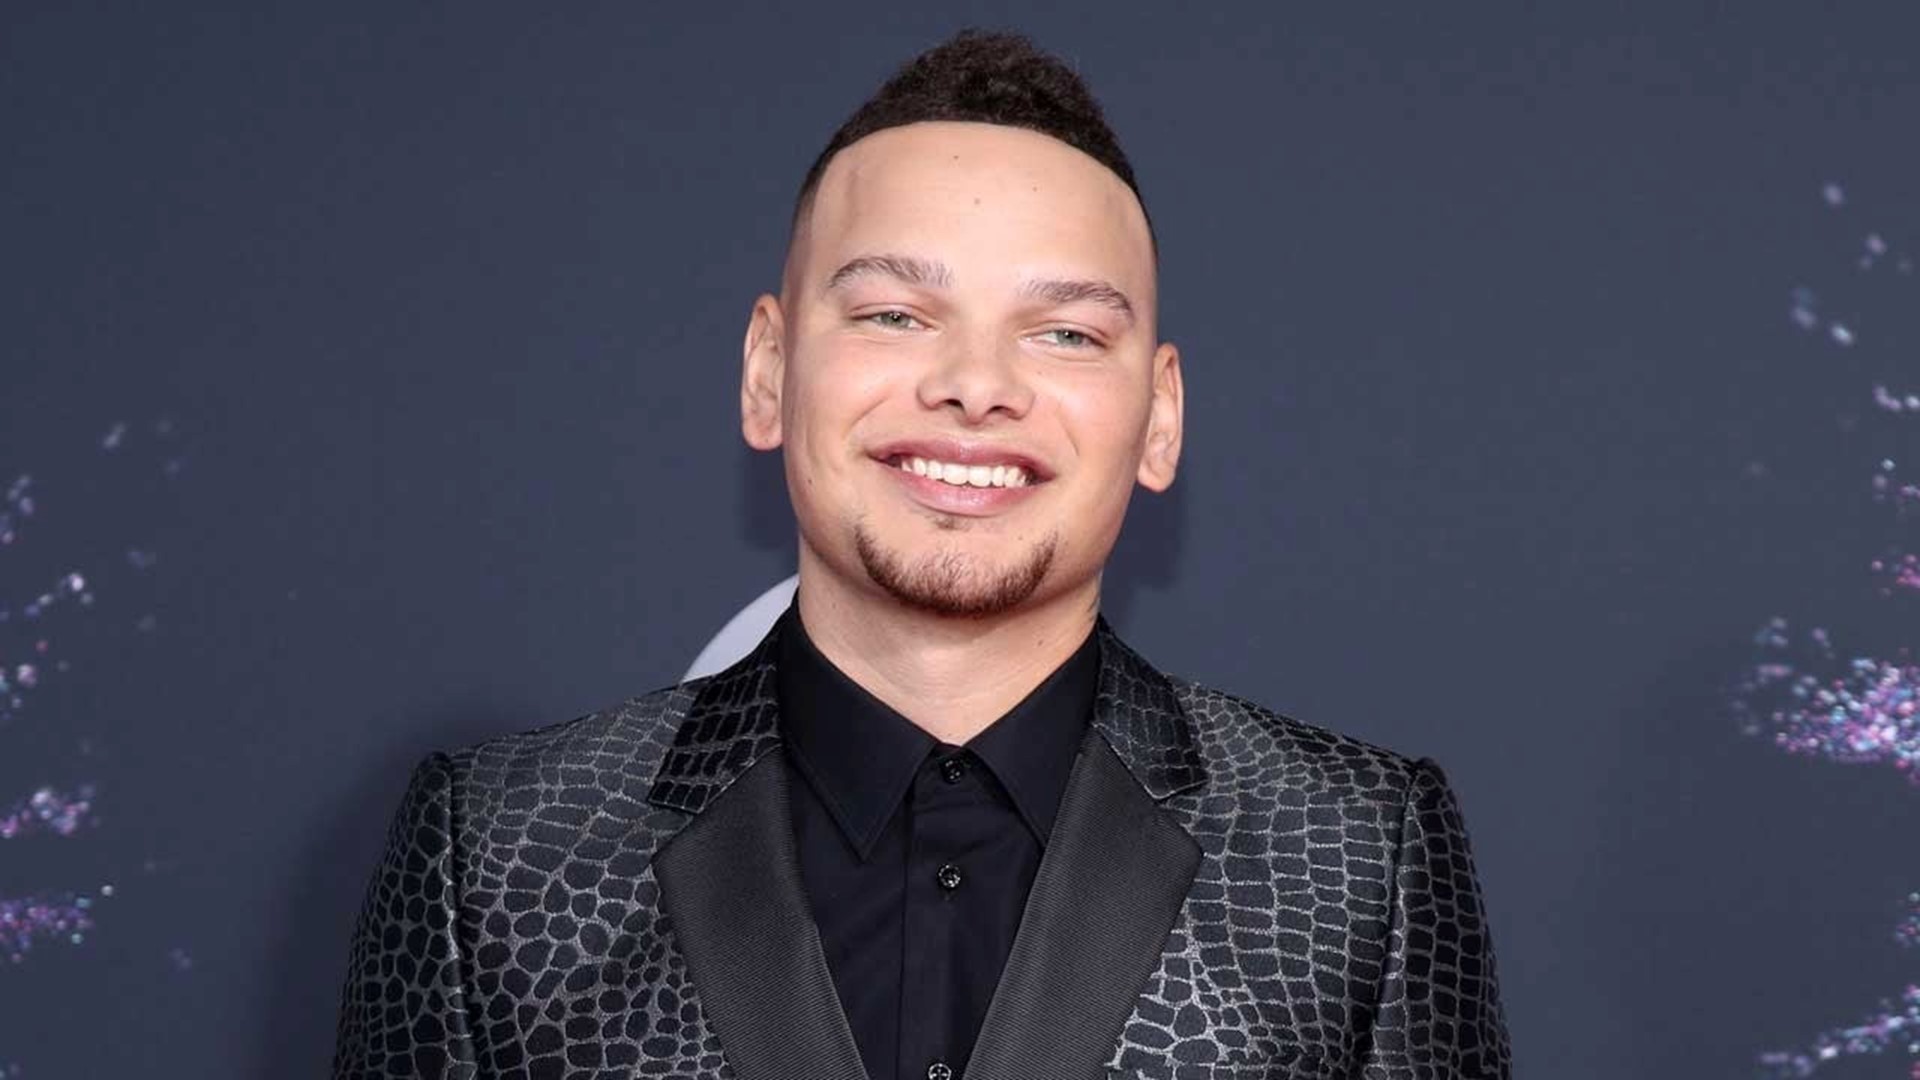 Kane Brown First Black Solo Artist to Win ACM 'Video of the